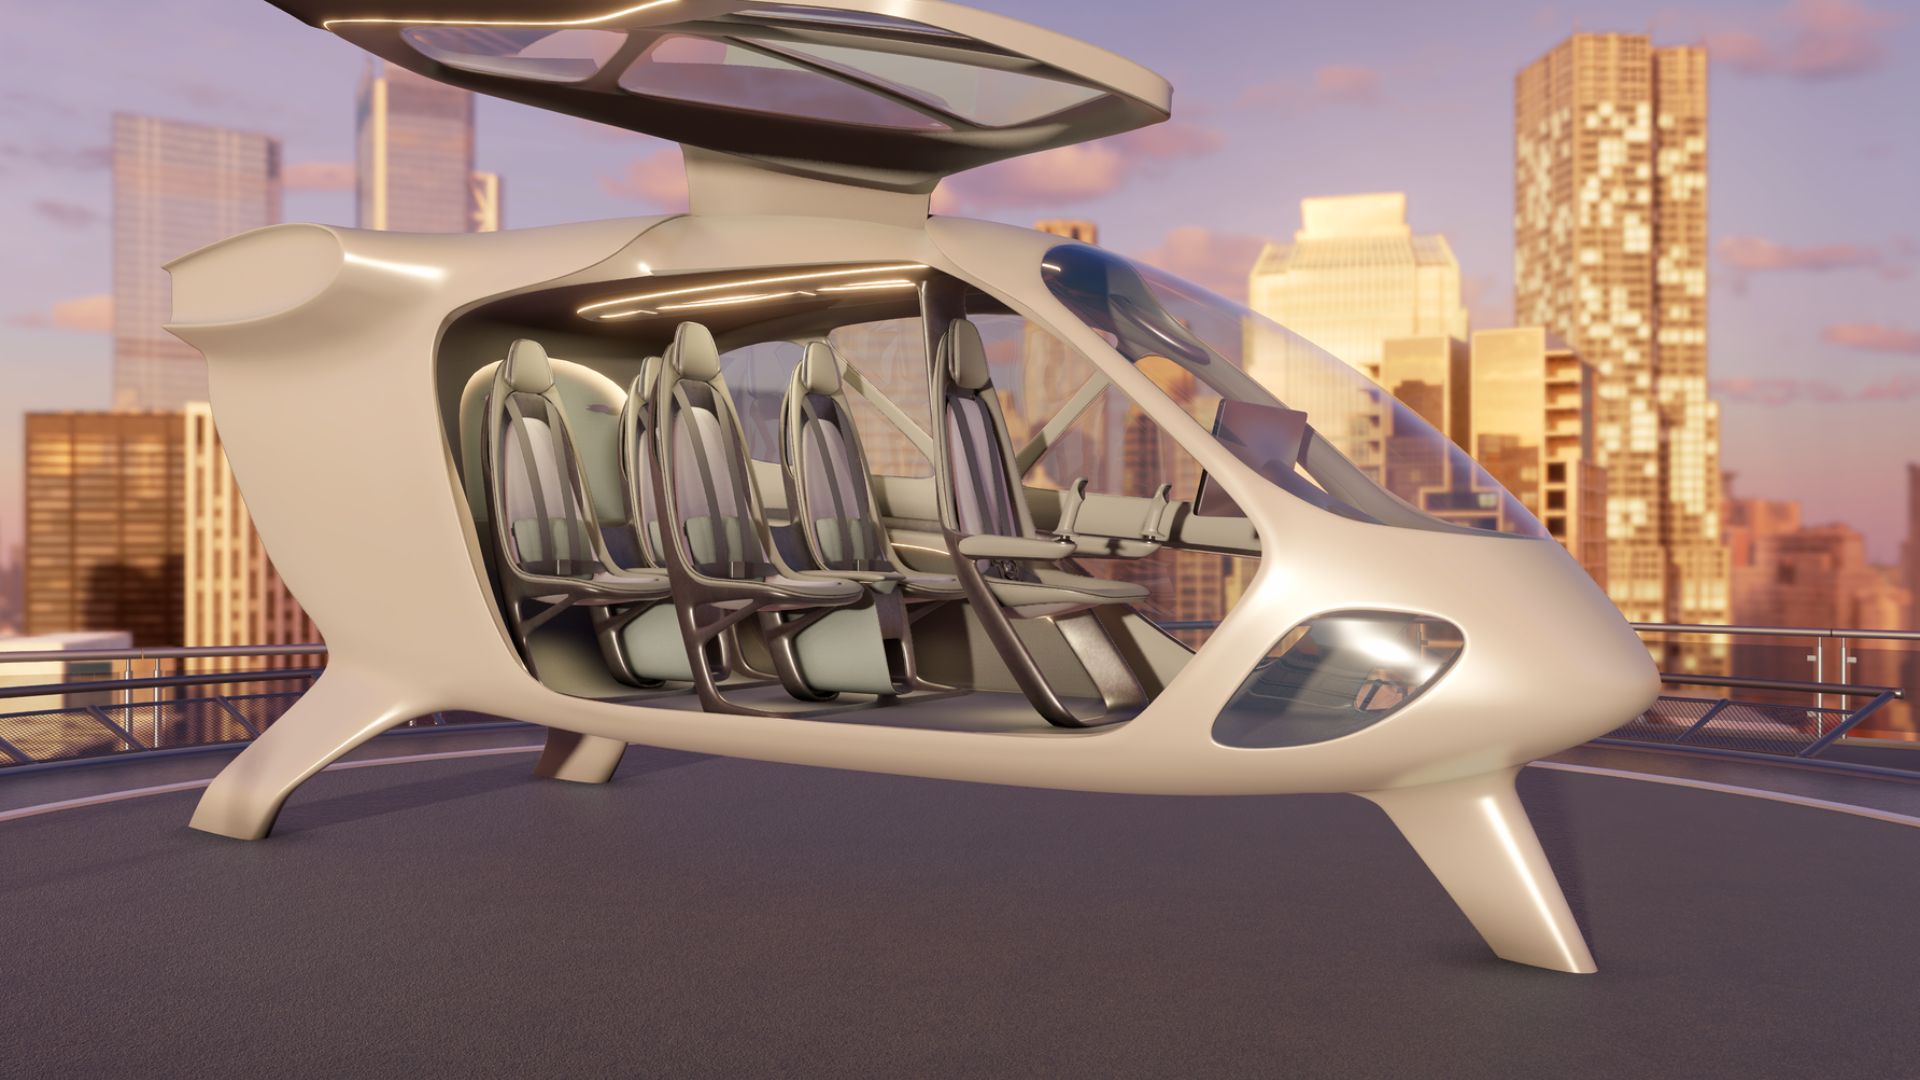 Hyundai says flying cars coming within the decade